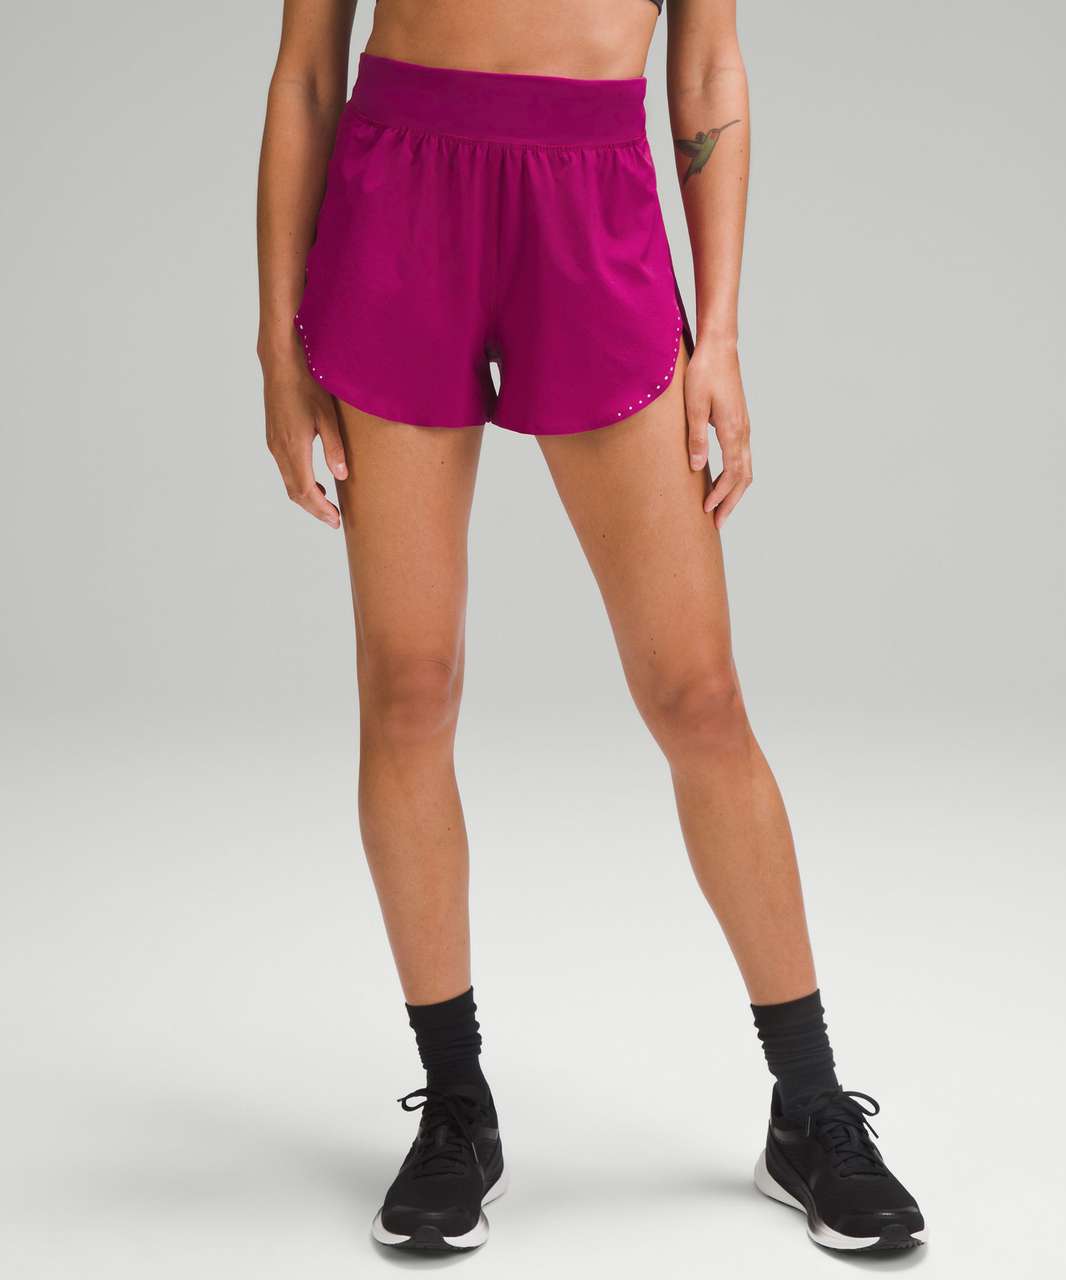 Lululemon Fast and Free Reflective High-Rise Classic-Fit Short 3" - Magenta Purple